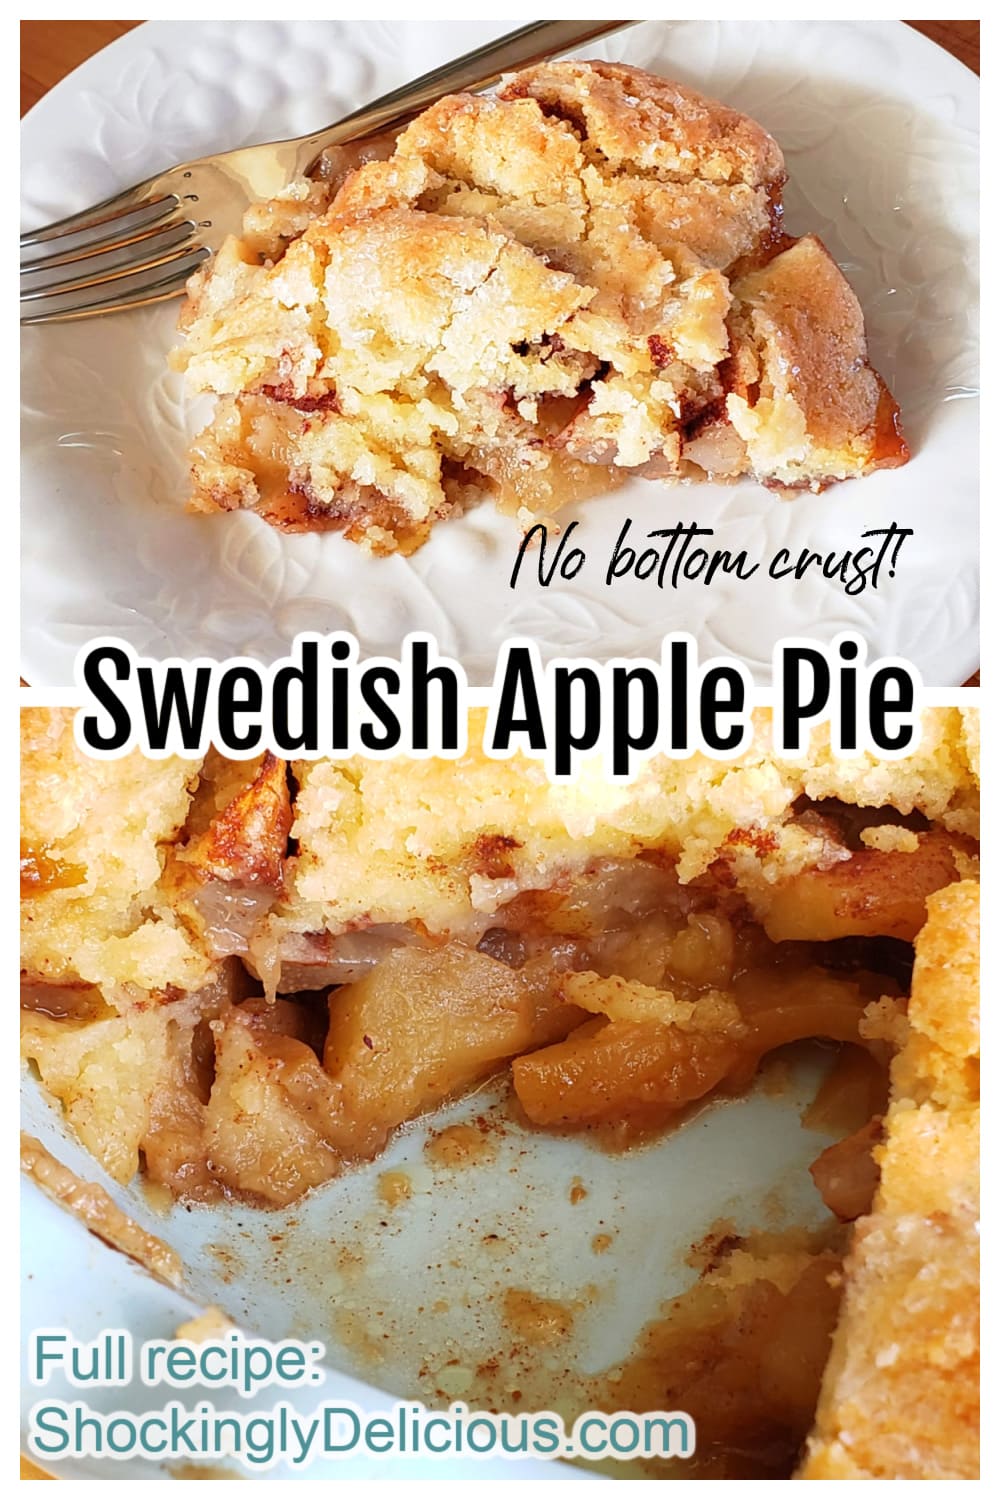 Swedish Apple Pie photo collage with title superimposed